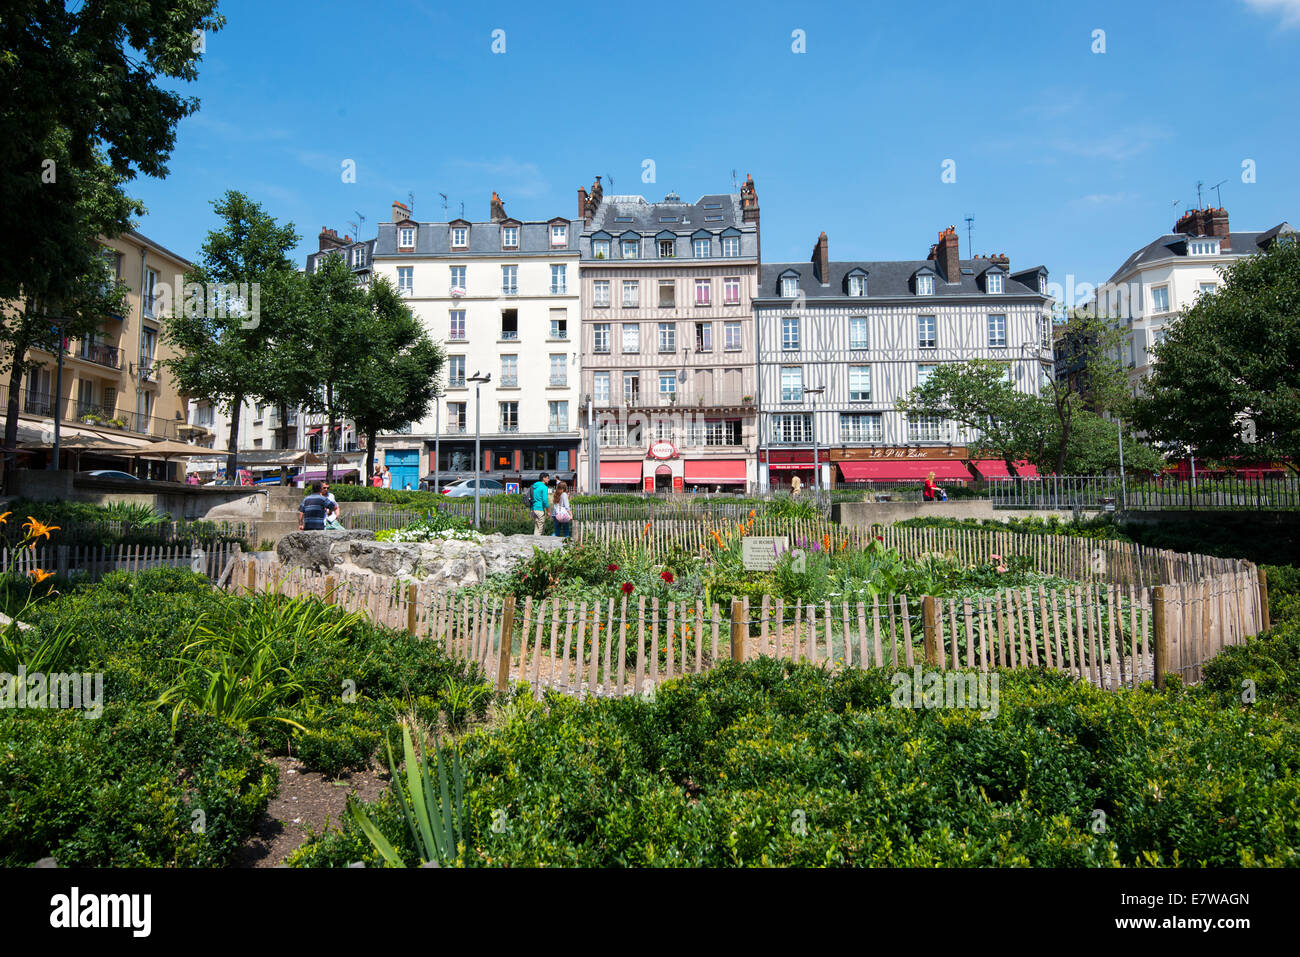 The historic market square in Rouen, France Europe Stock Photo - Alamy